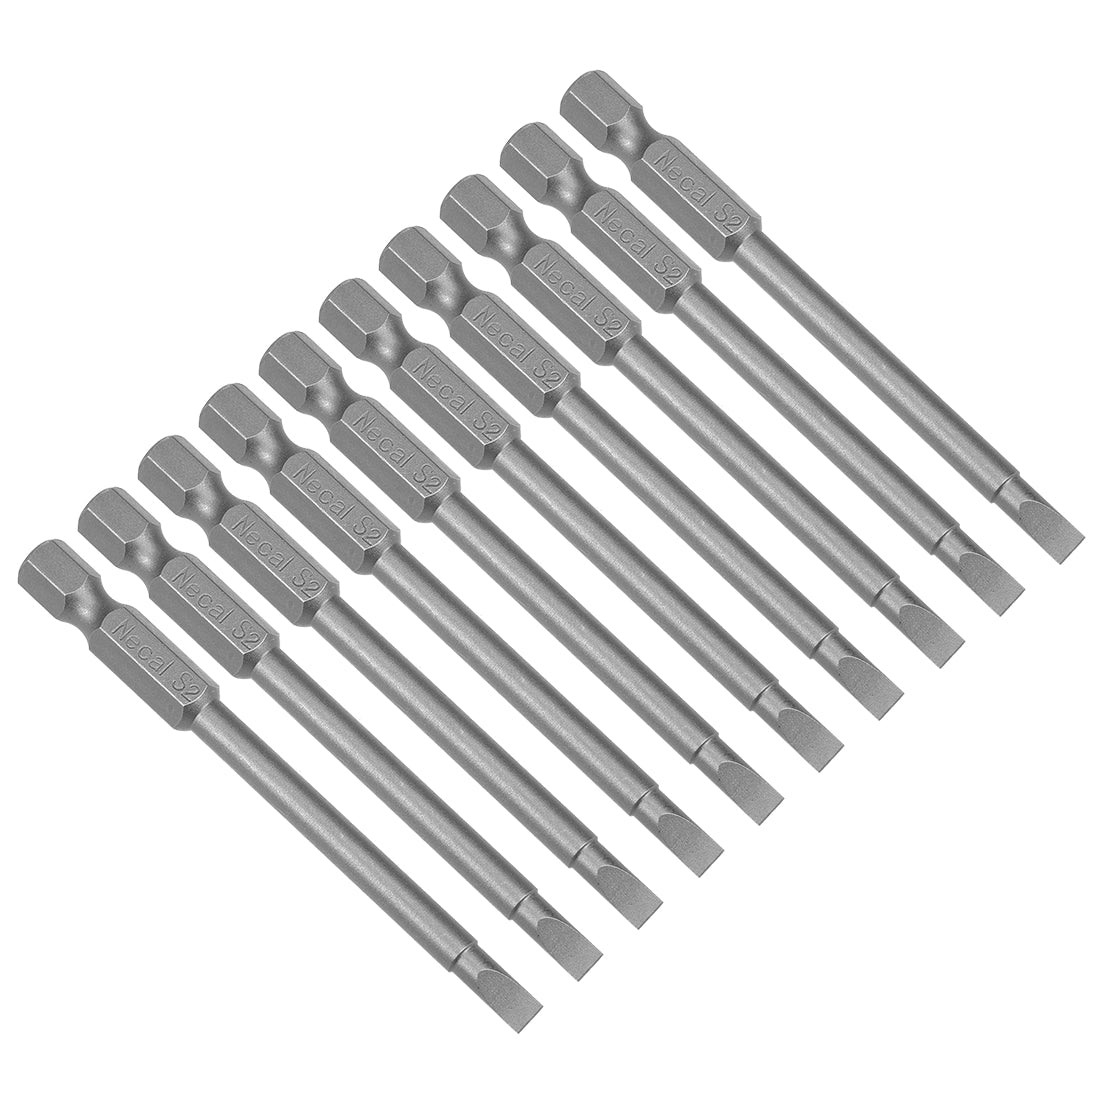 Uxcell Uxcell 10 Pcs 6mm Slotted Tip Magnetic Flat Head Screwdriver Bits, 1/4 Inch Hex Shank 2.5-inch Length S2 Power Tool